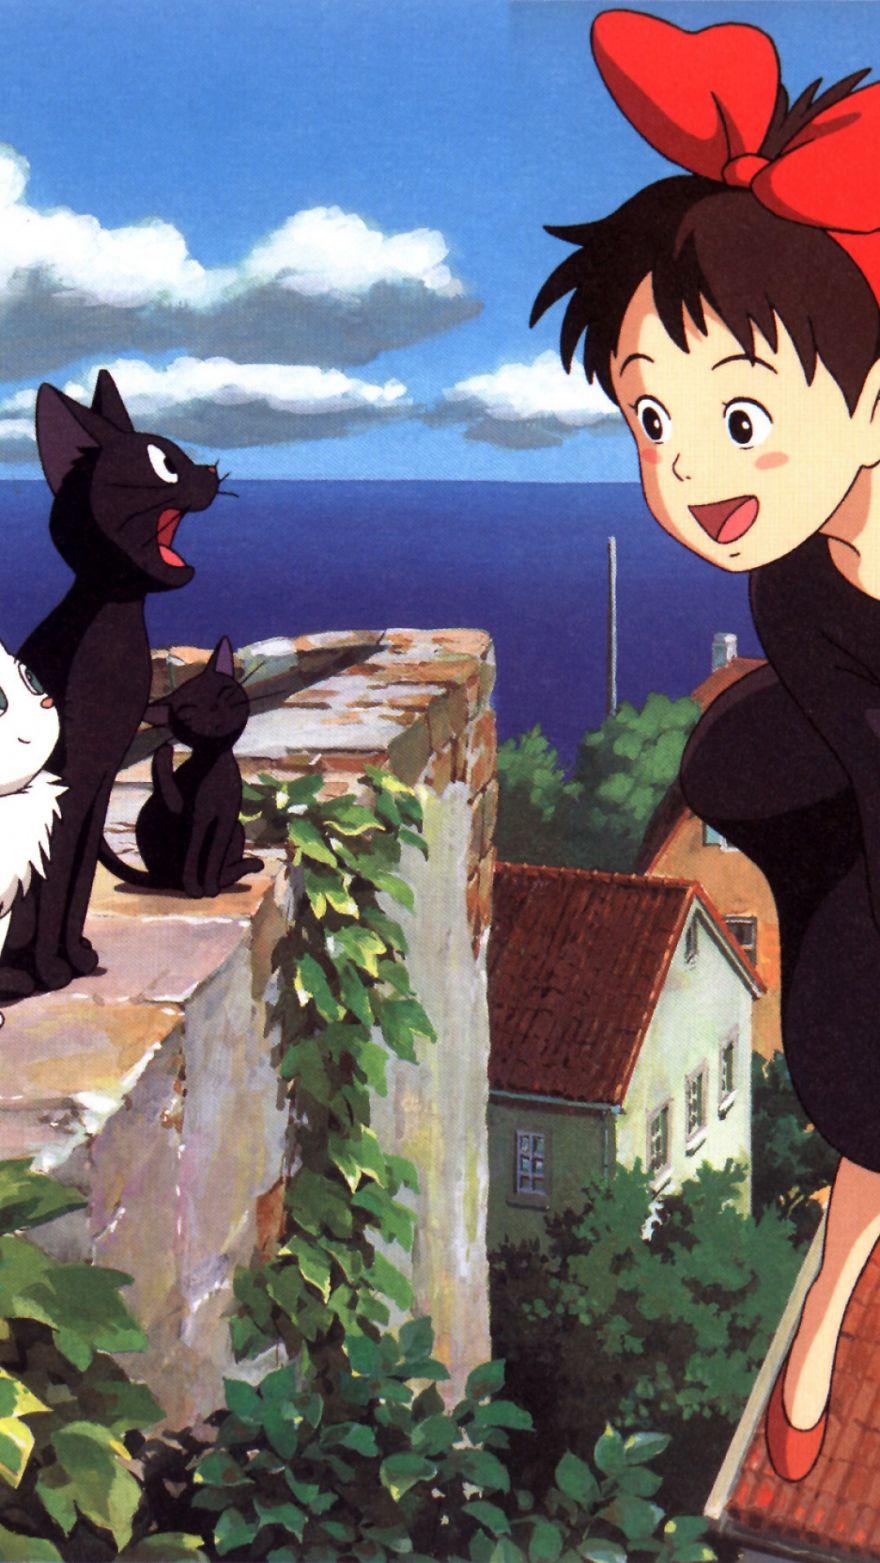 Celebrate The 31st BirtHDay Of Studio Ghibli With These